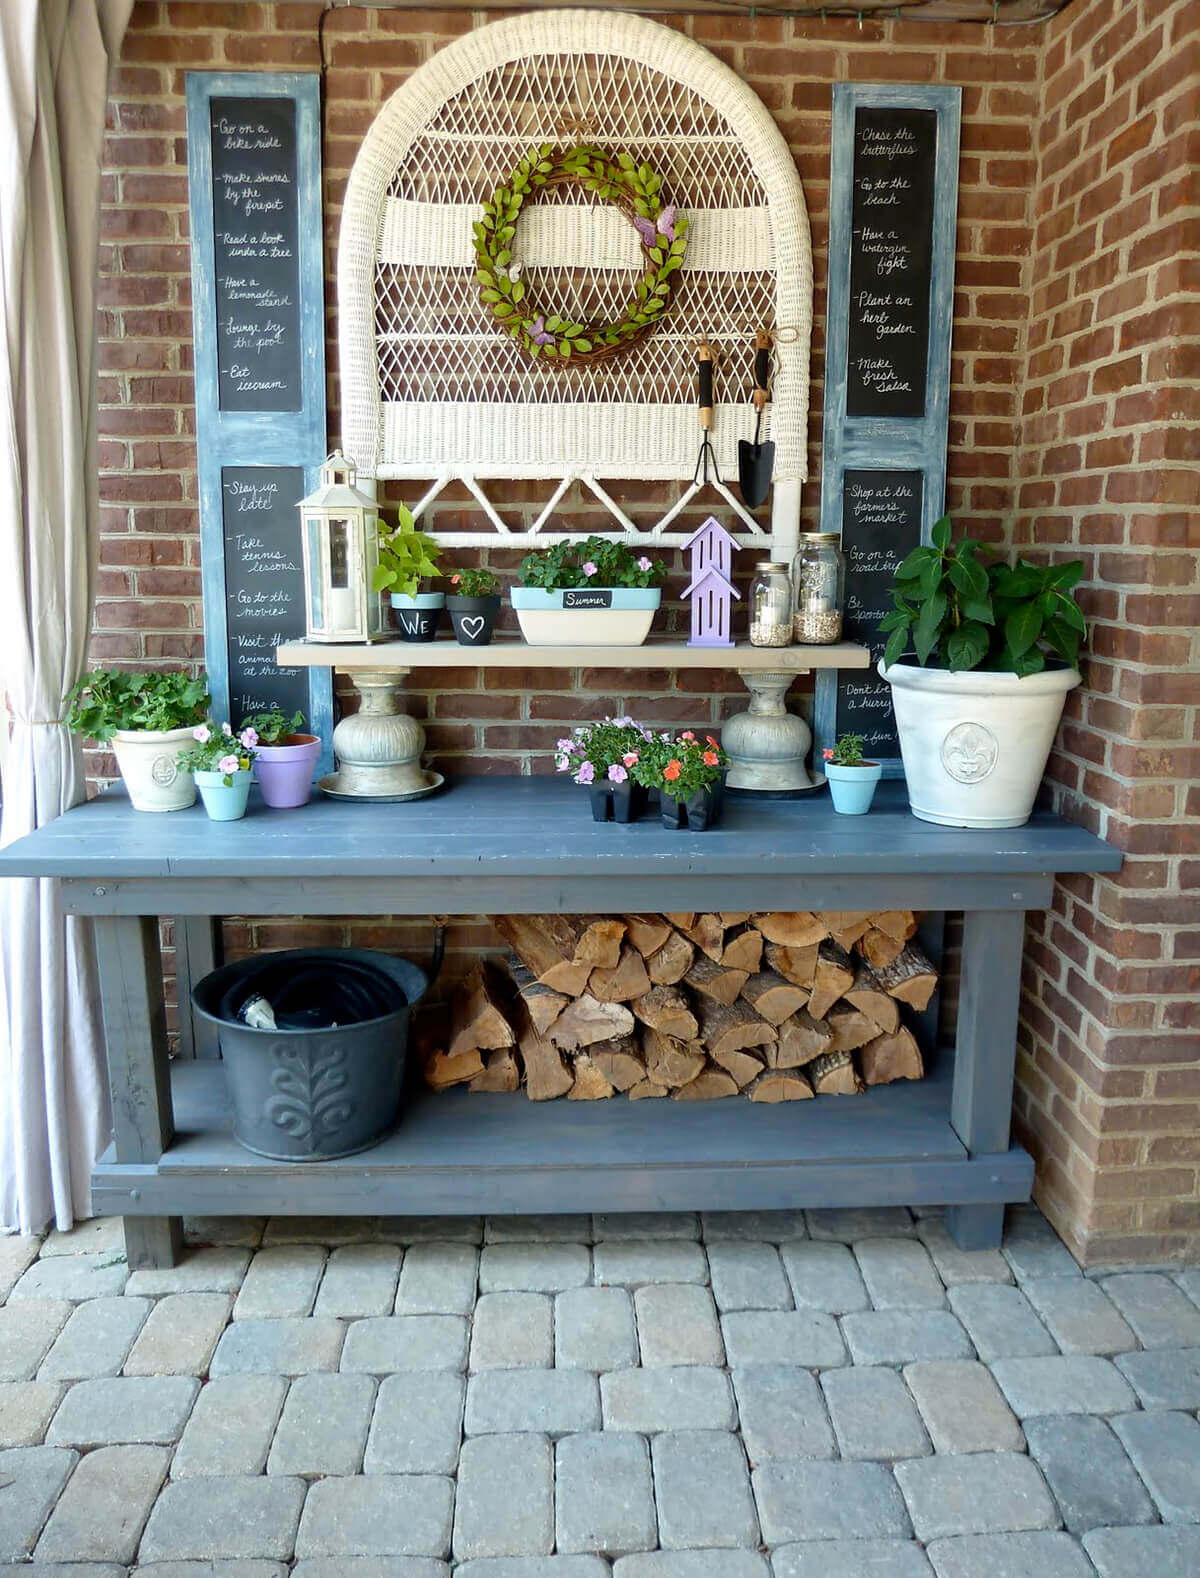 Chalkboard Accents, Firewood, and Other Whimsies